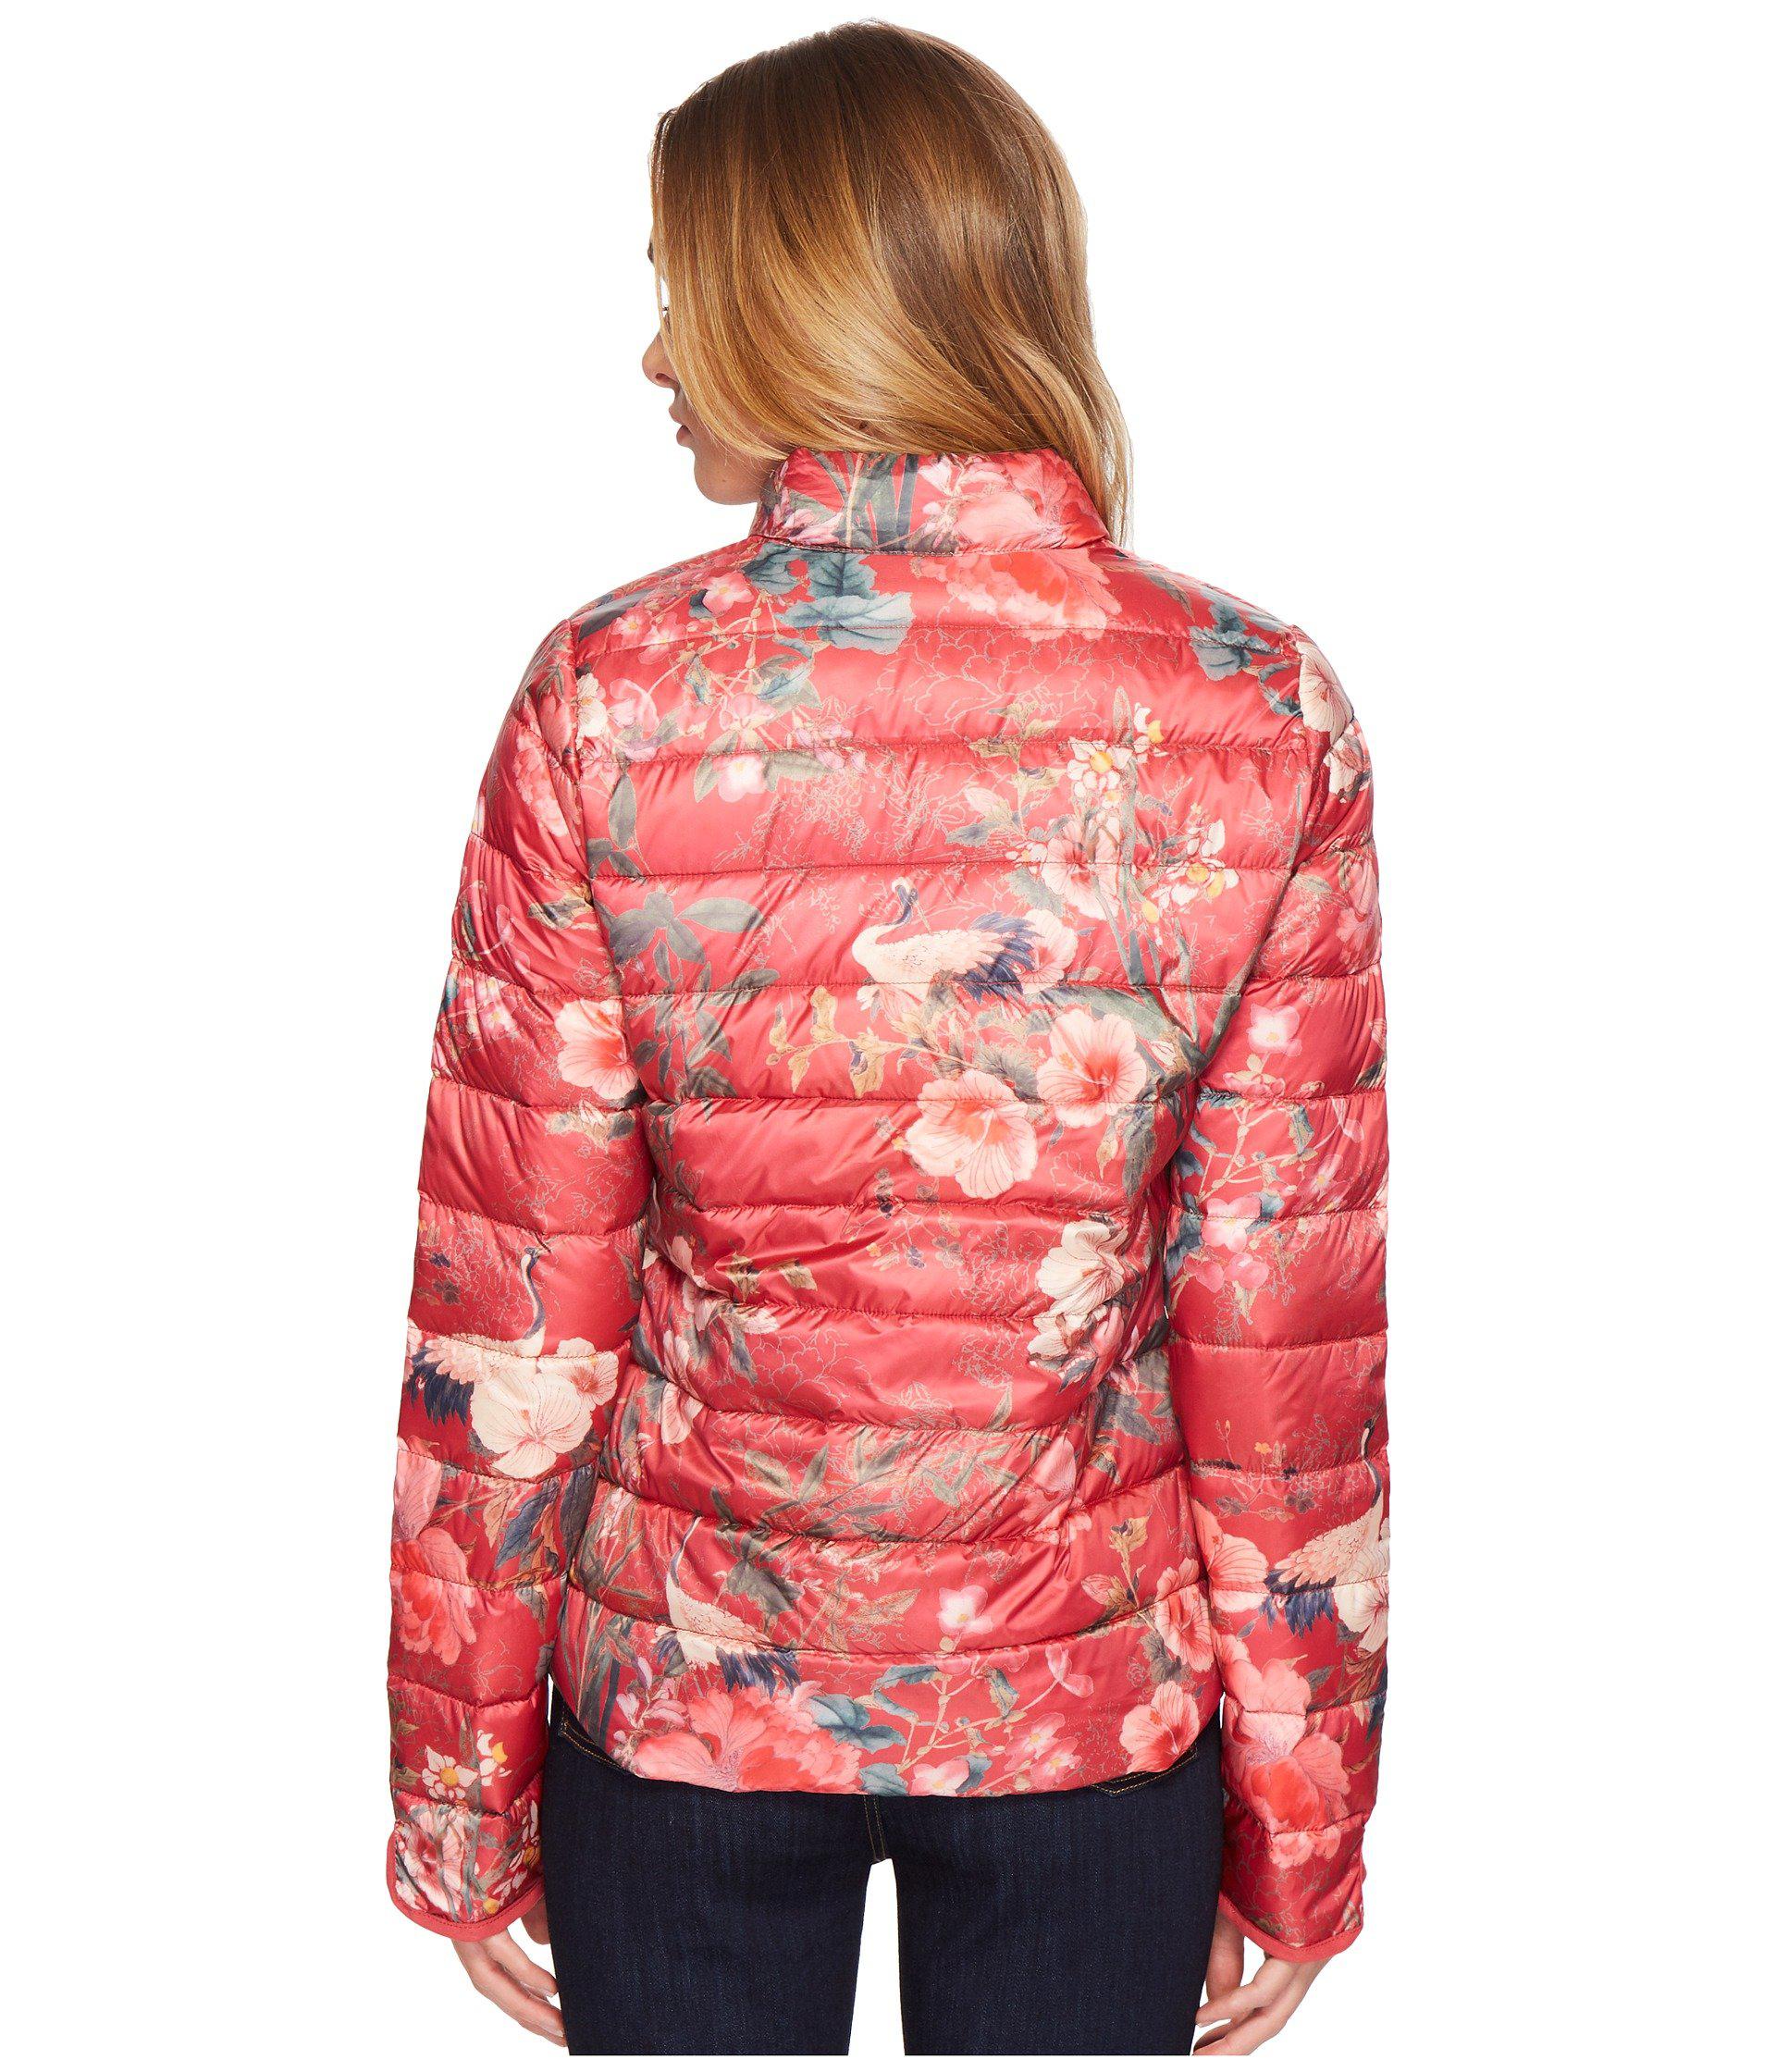 Lyst - Ilse Jacobsen Printed Puffer Coat in Pink